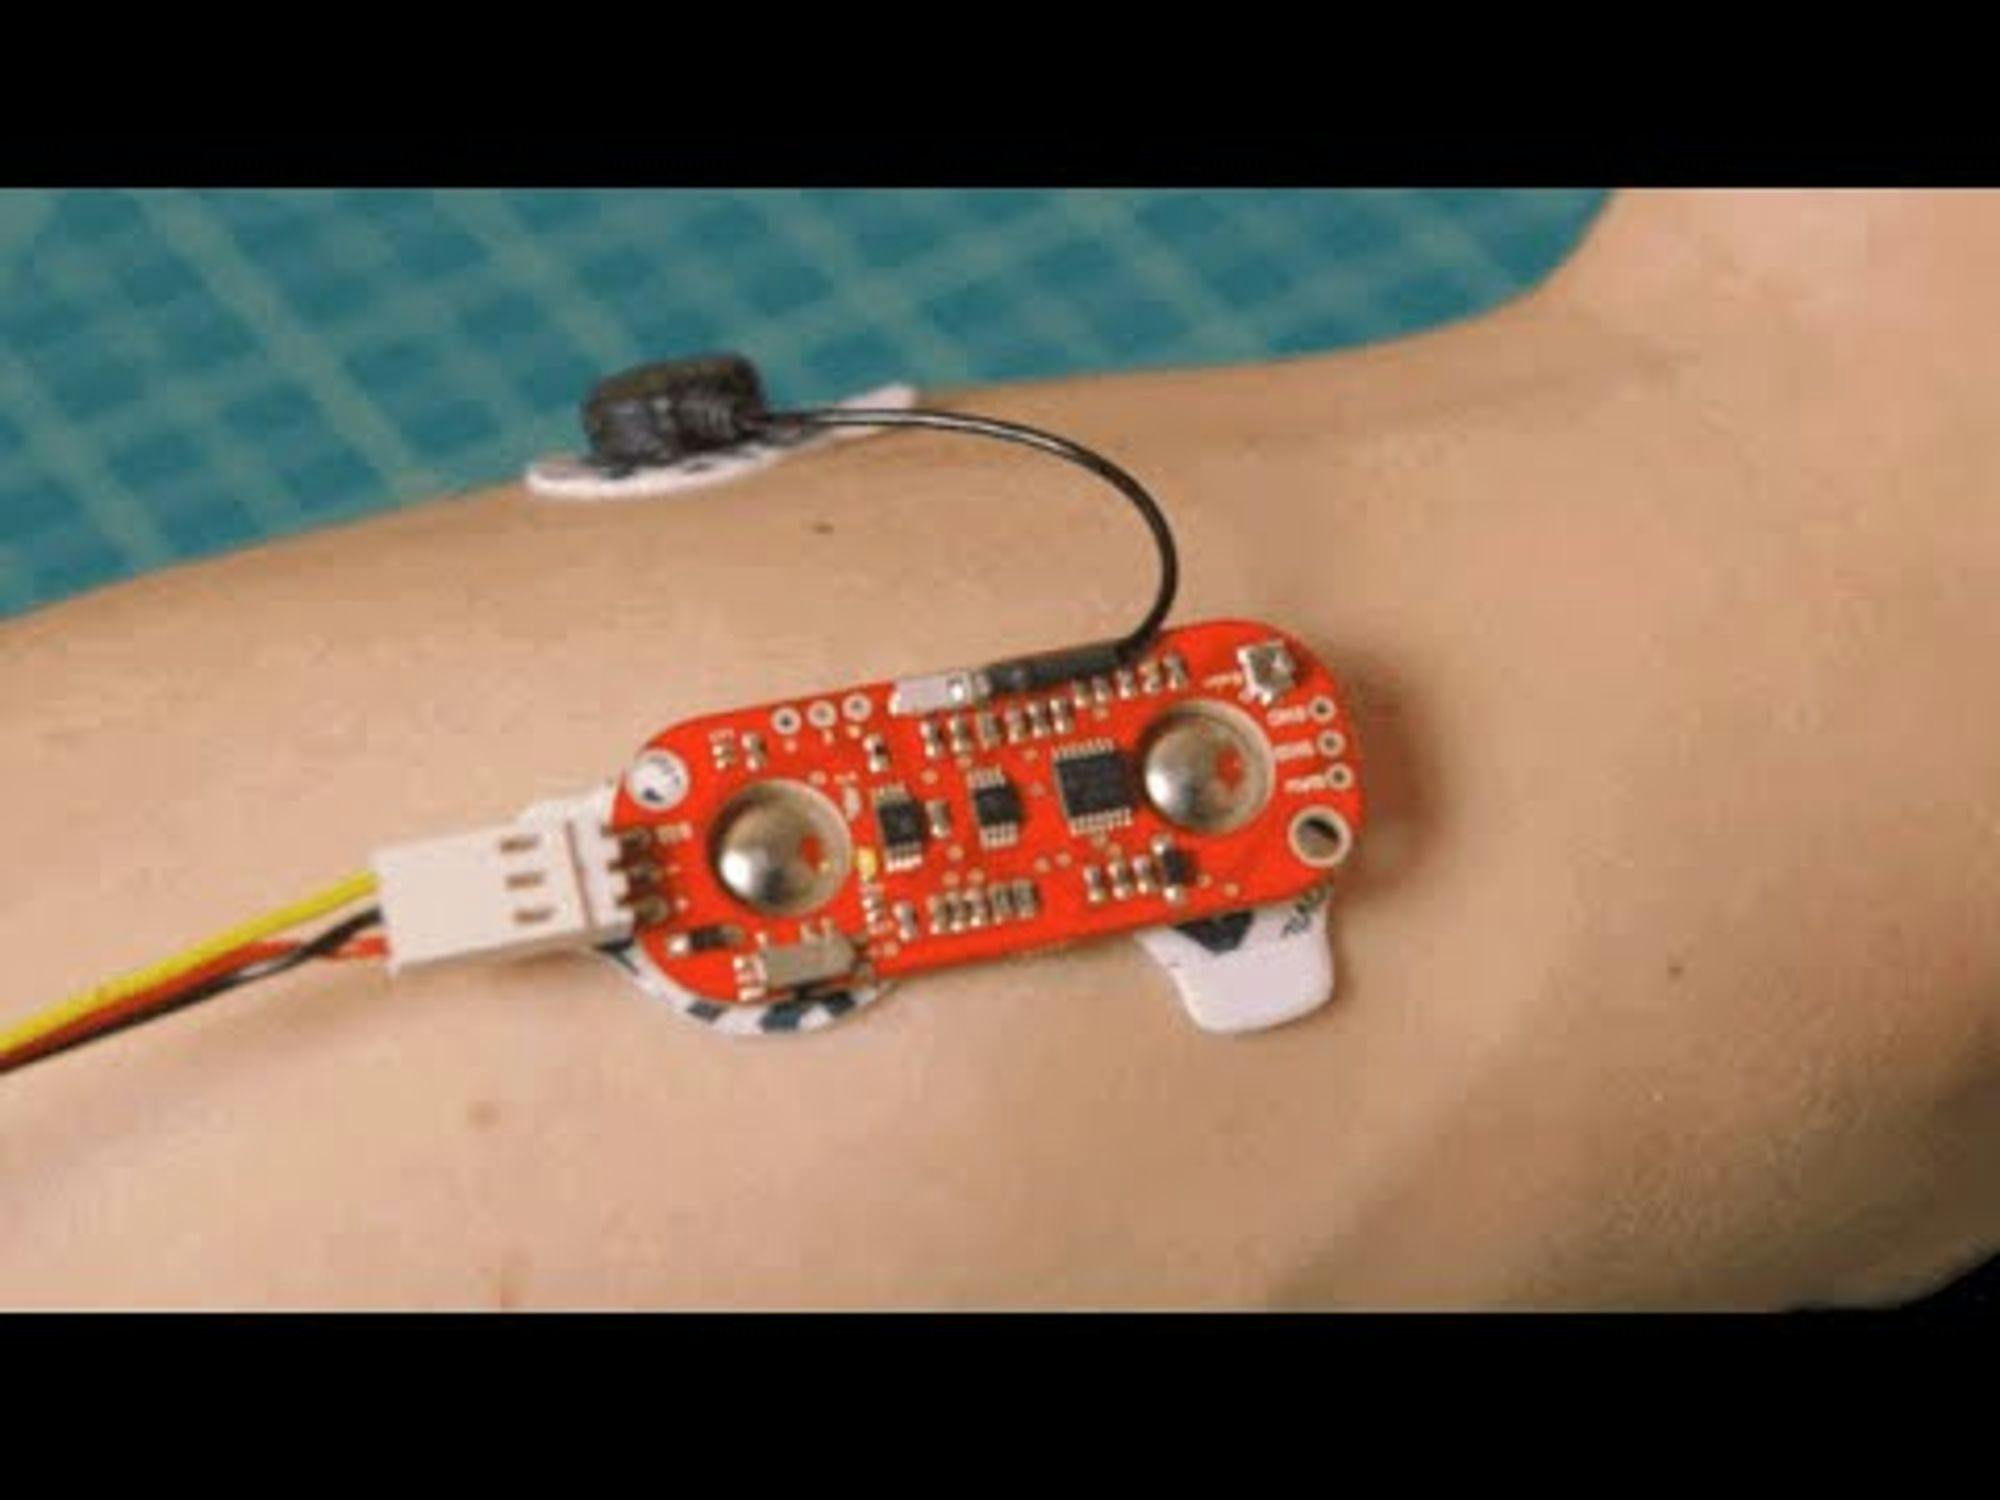 How to Use EMG Muscle Sensor to Control Anything (MyoWare)